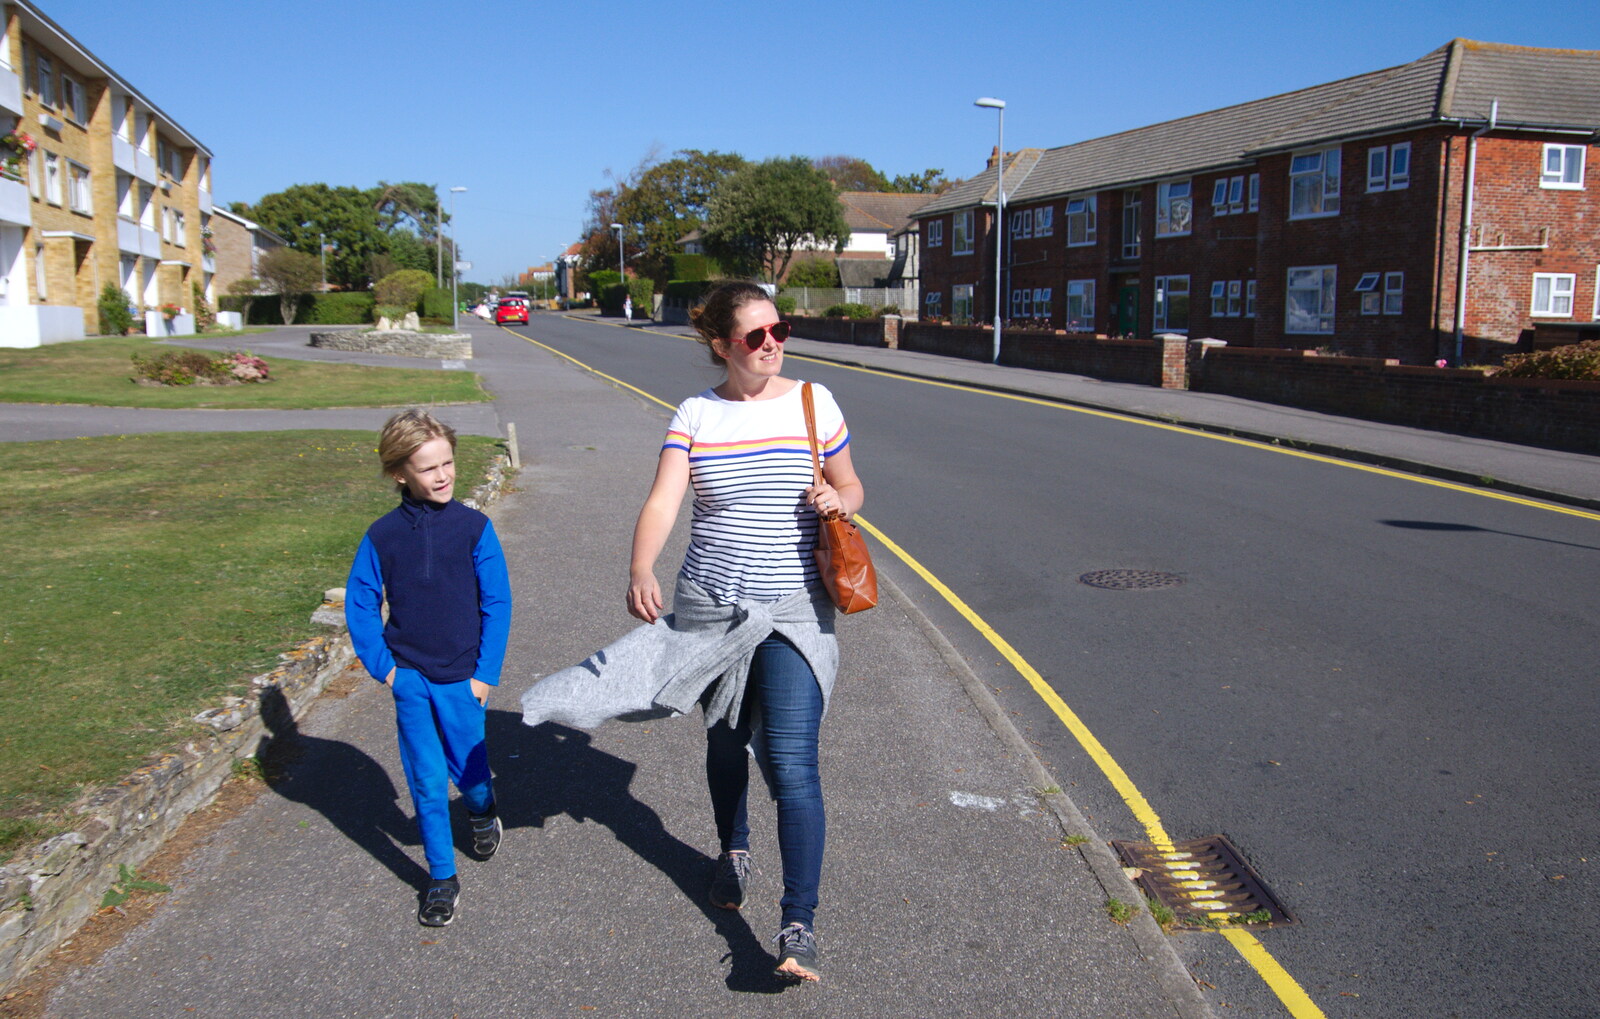 Harry and Isobel stride down Waterford Road from A Trip to the South Coast, Highcliffe, Dorset - 20th September 2019